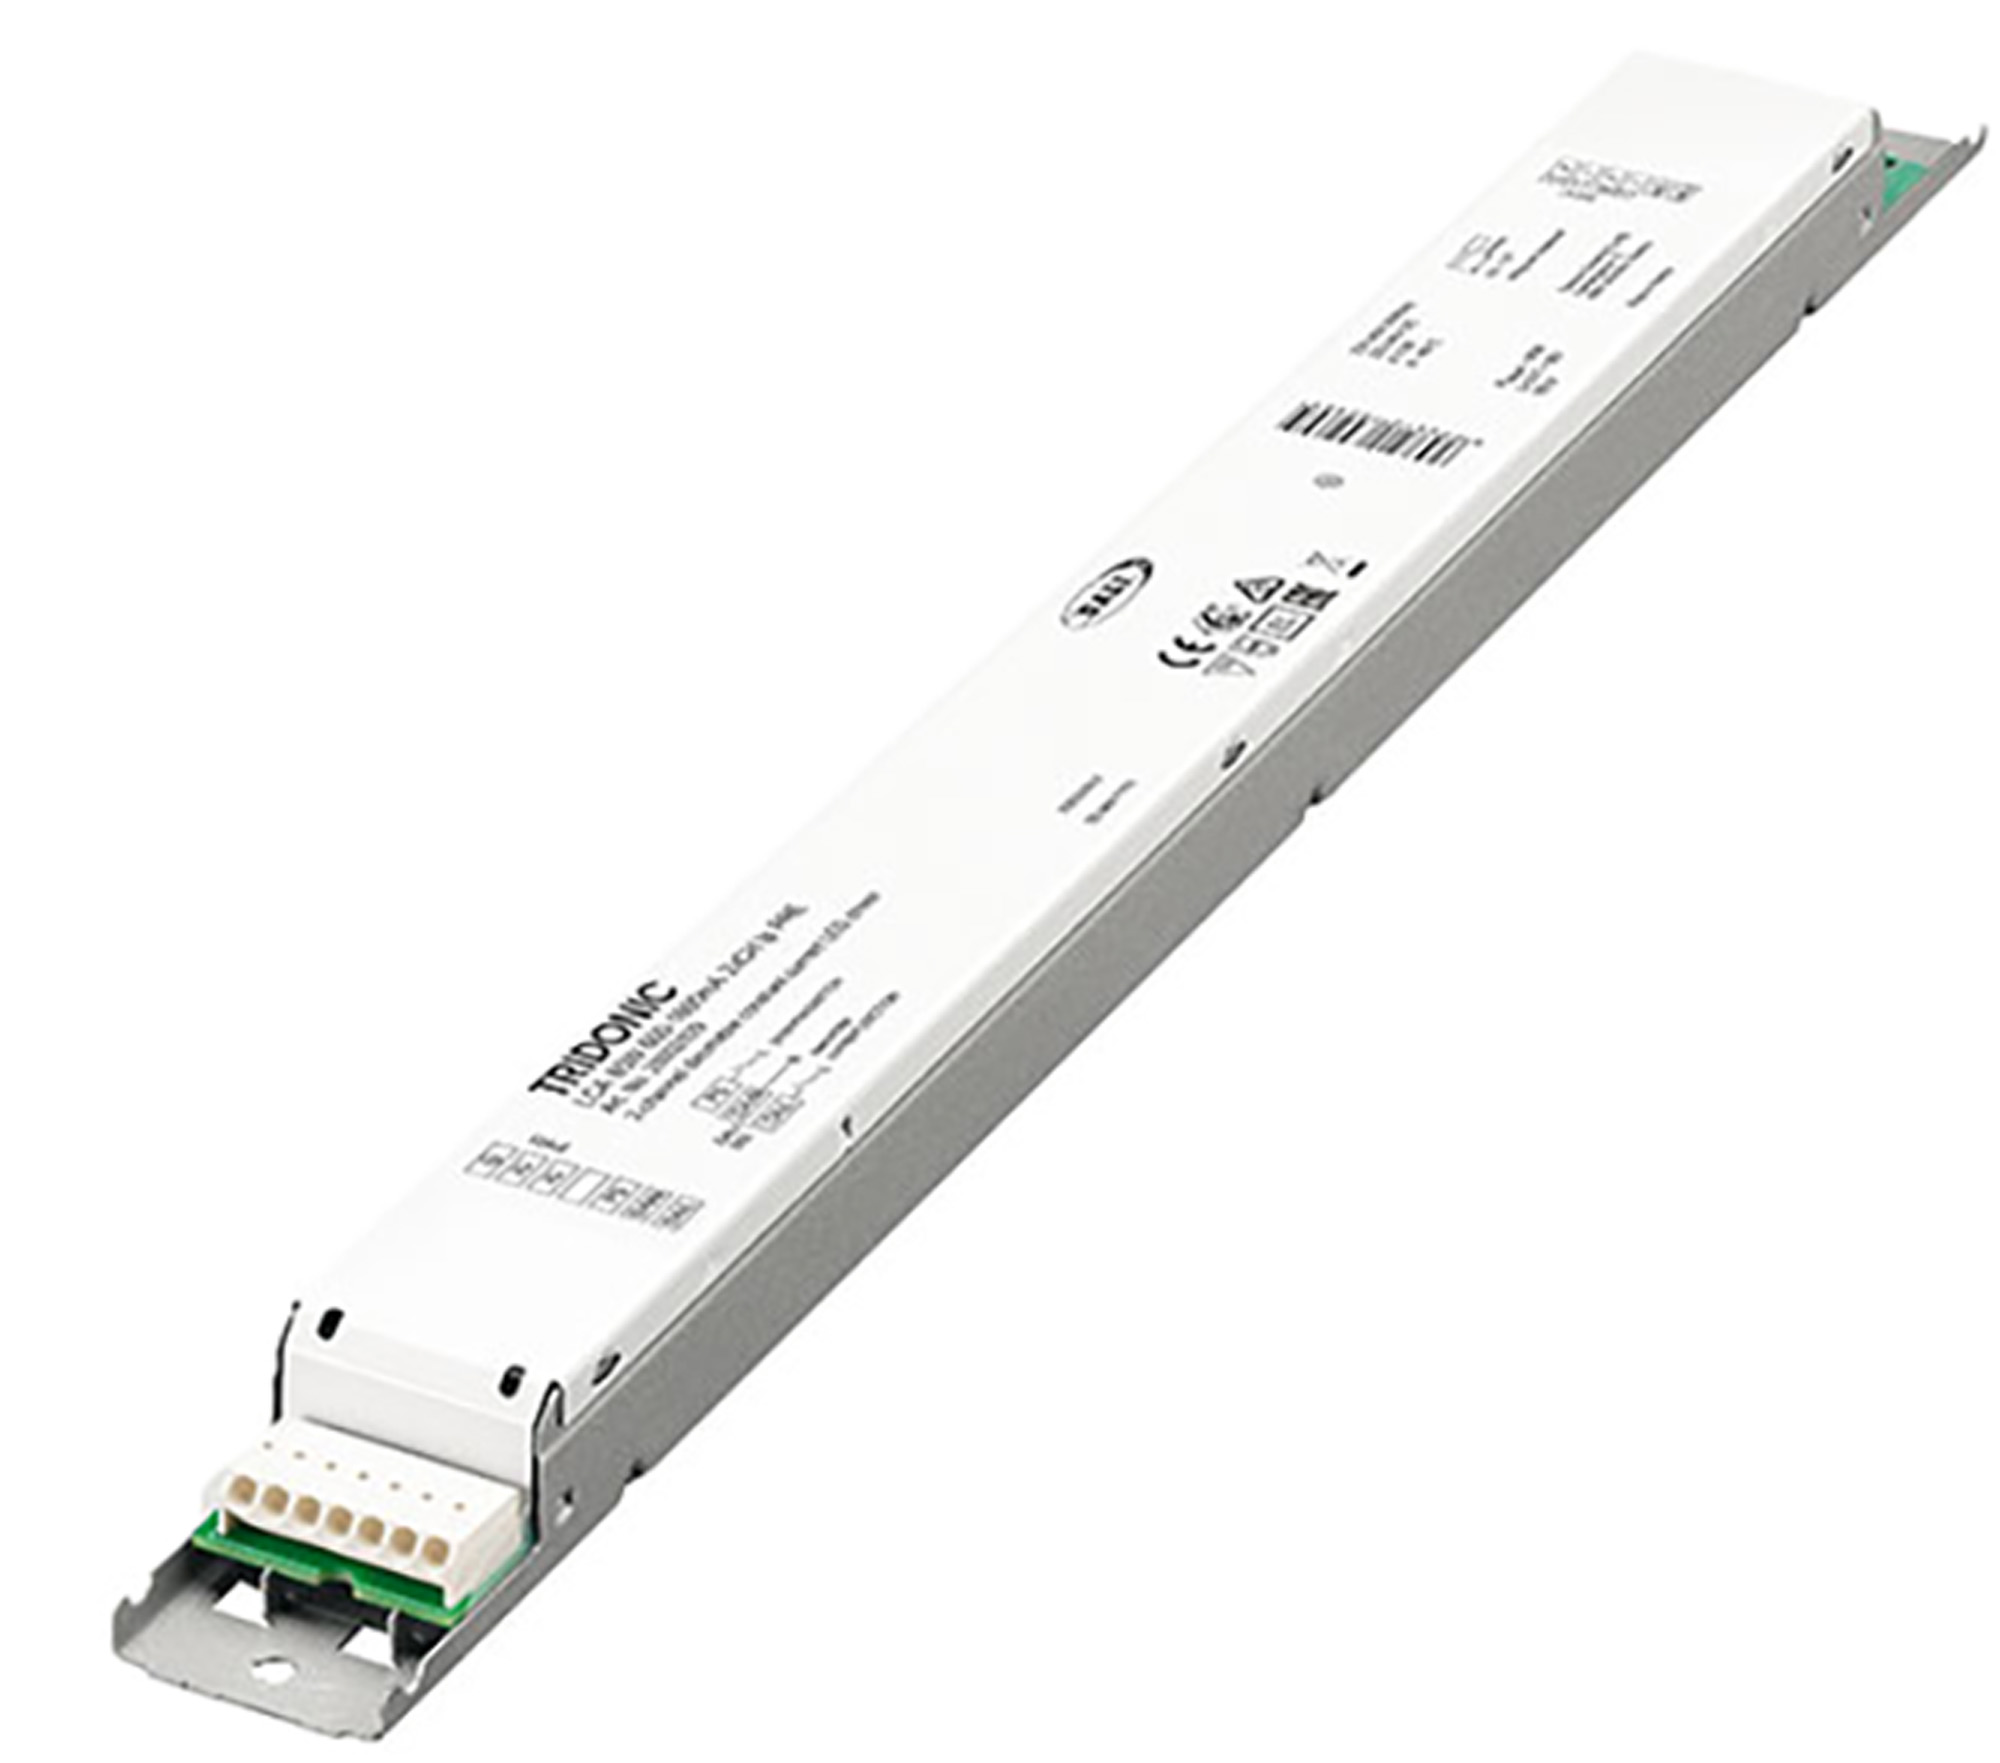 28002829  85W 600-1800mA 2xCH lp PRE MULTI Channel premium SELV  series Driver;  Dimmable built-in constant current 2-channel LED driver with DALI DT6  ;5yrs Warranty